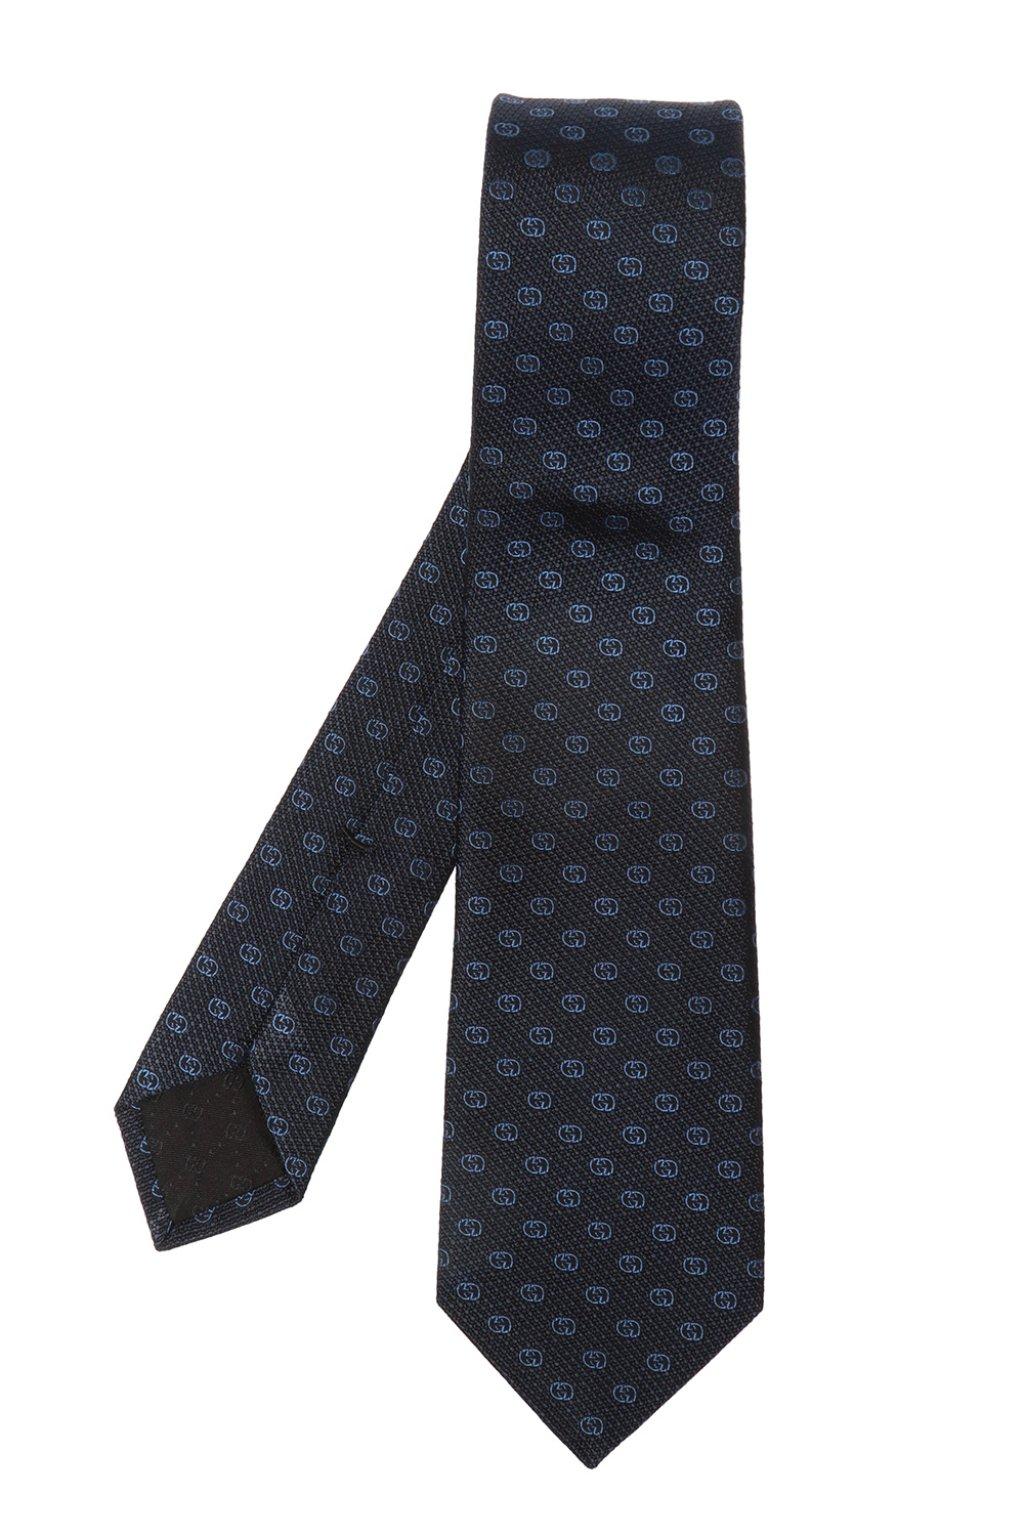 Gucci Silk Branded Jacquard Tie in Navy Blue (Blue) for Men - Lyst